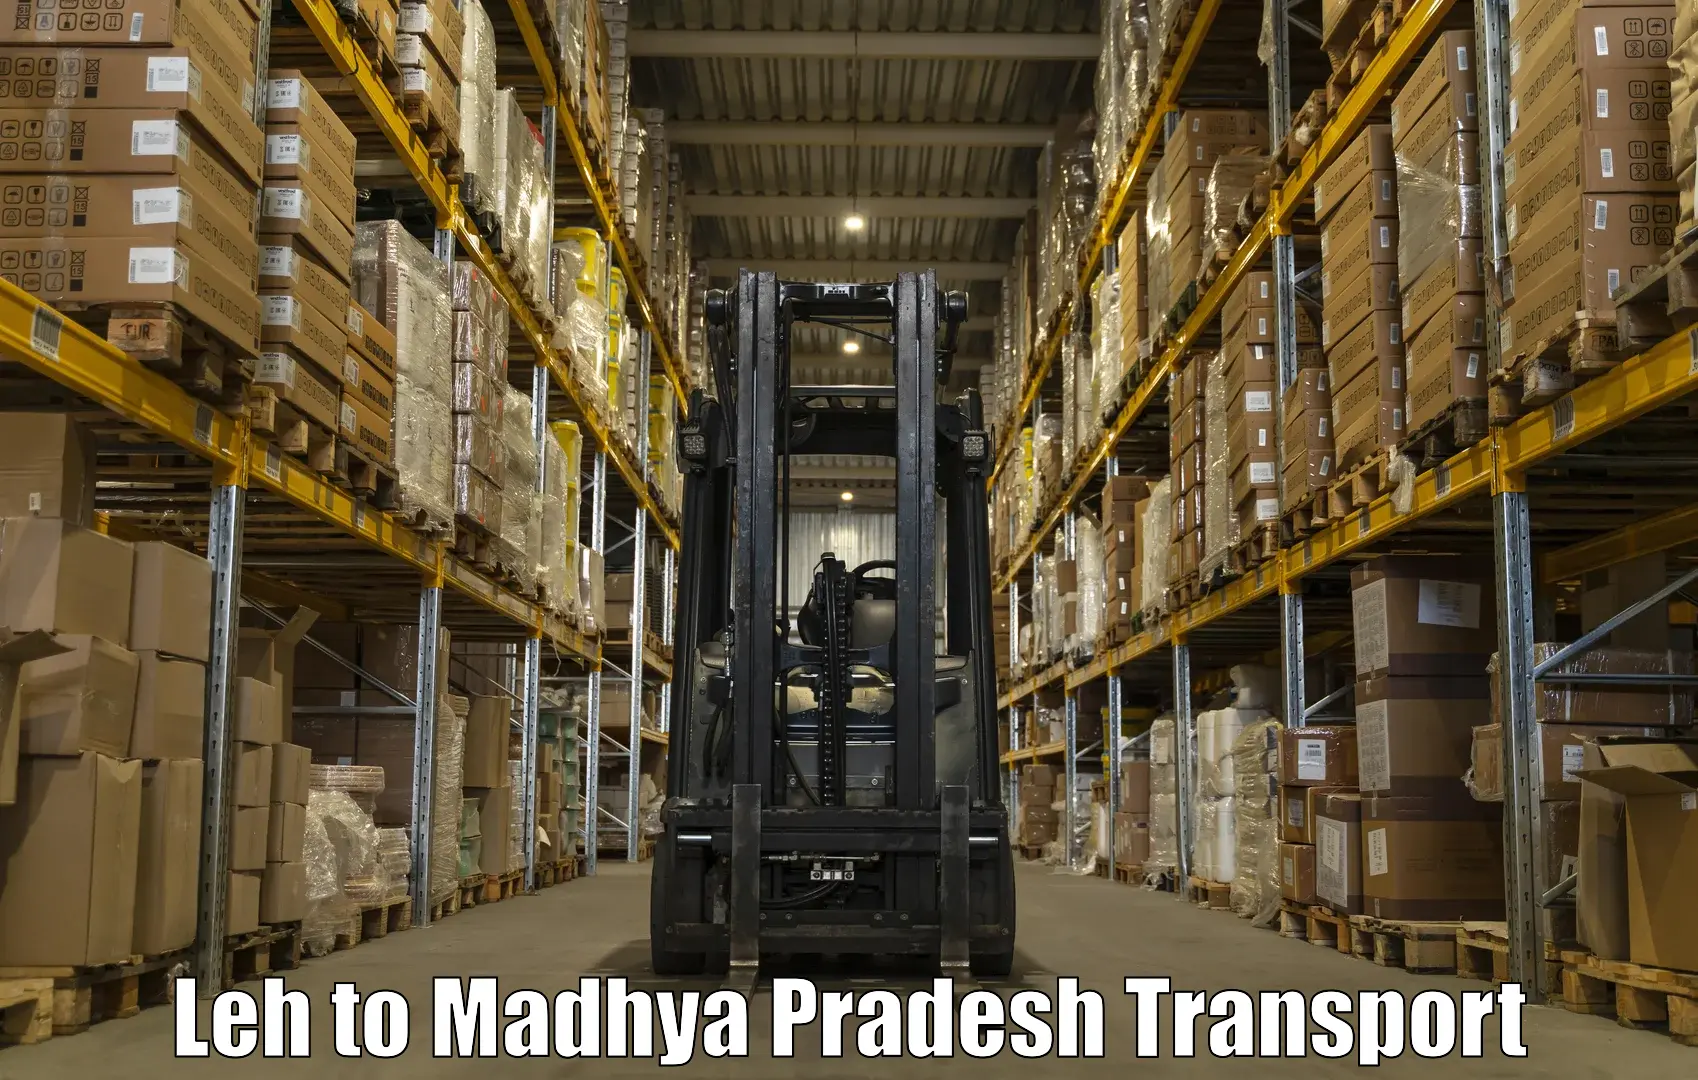 Cargo transportation services Leh to Bhopal